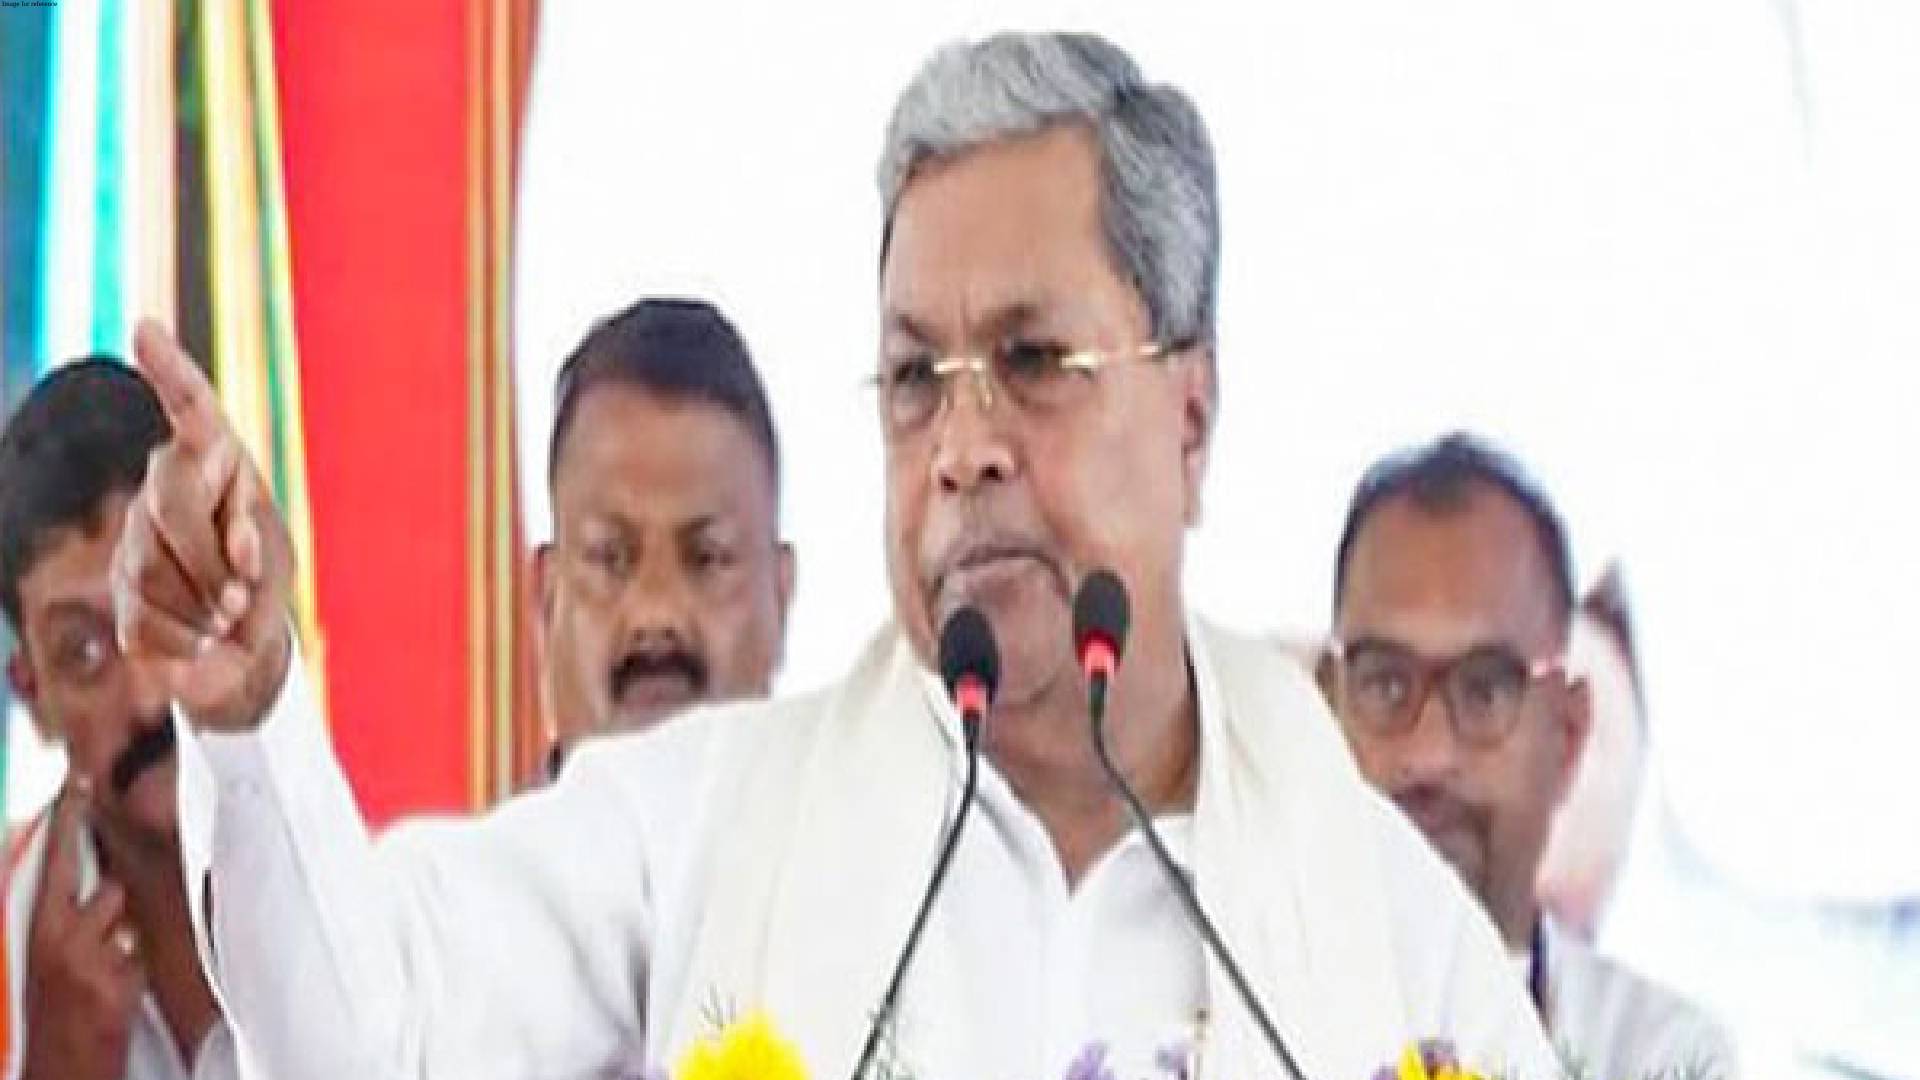 Obscene video case: K'taka CM Siddaramaiah assures to provide all support to victims, acknowledges Rahul Gandhi's letter